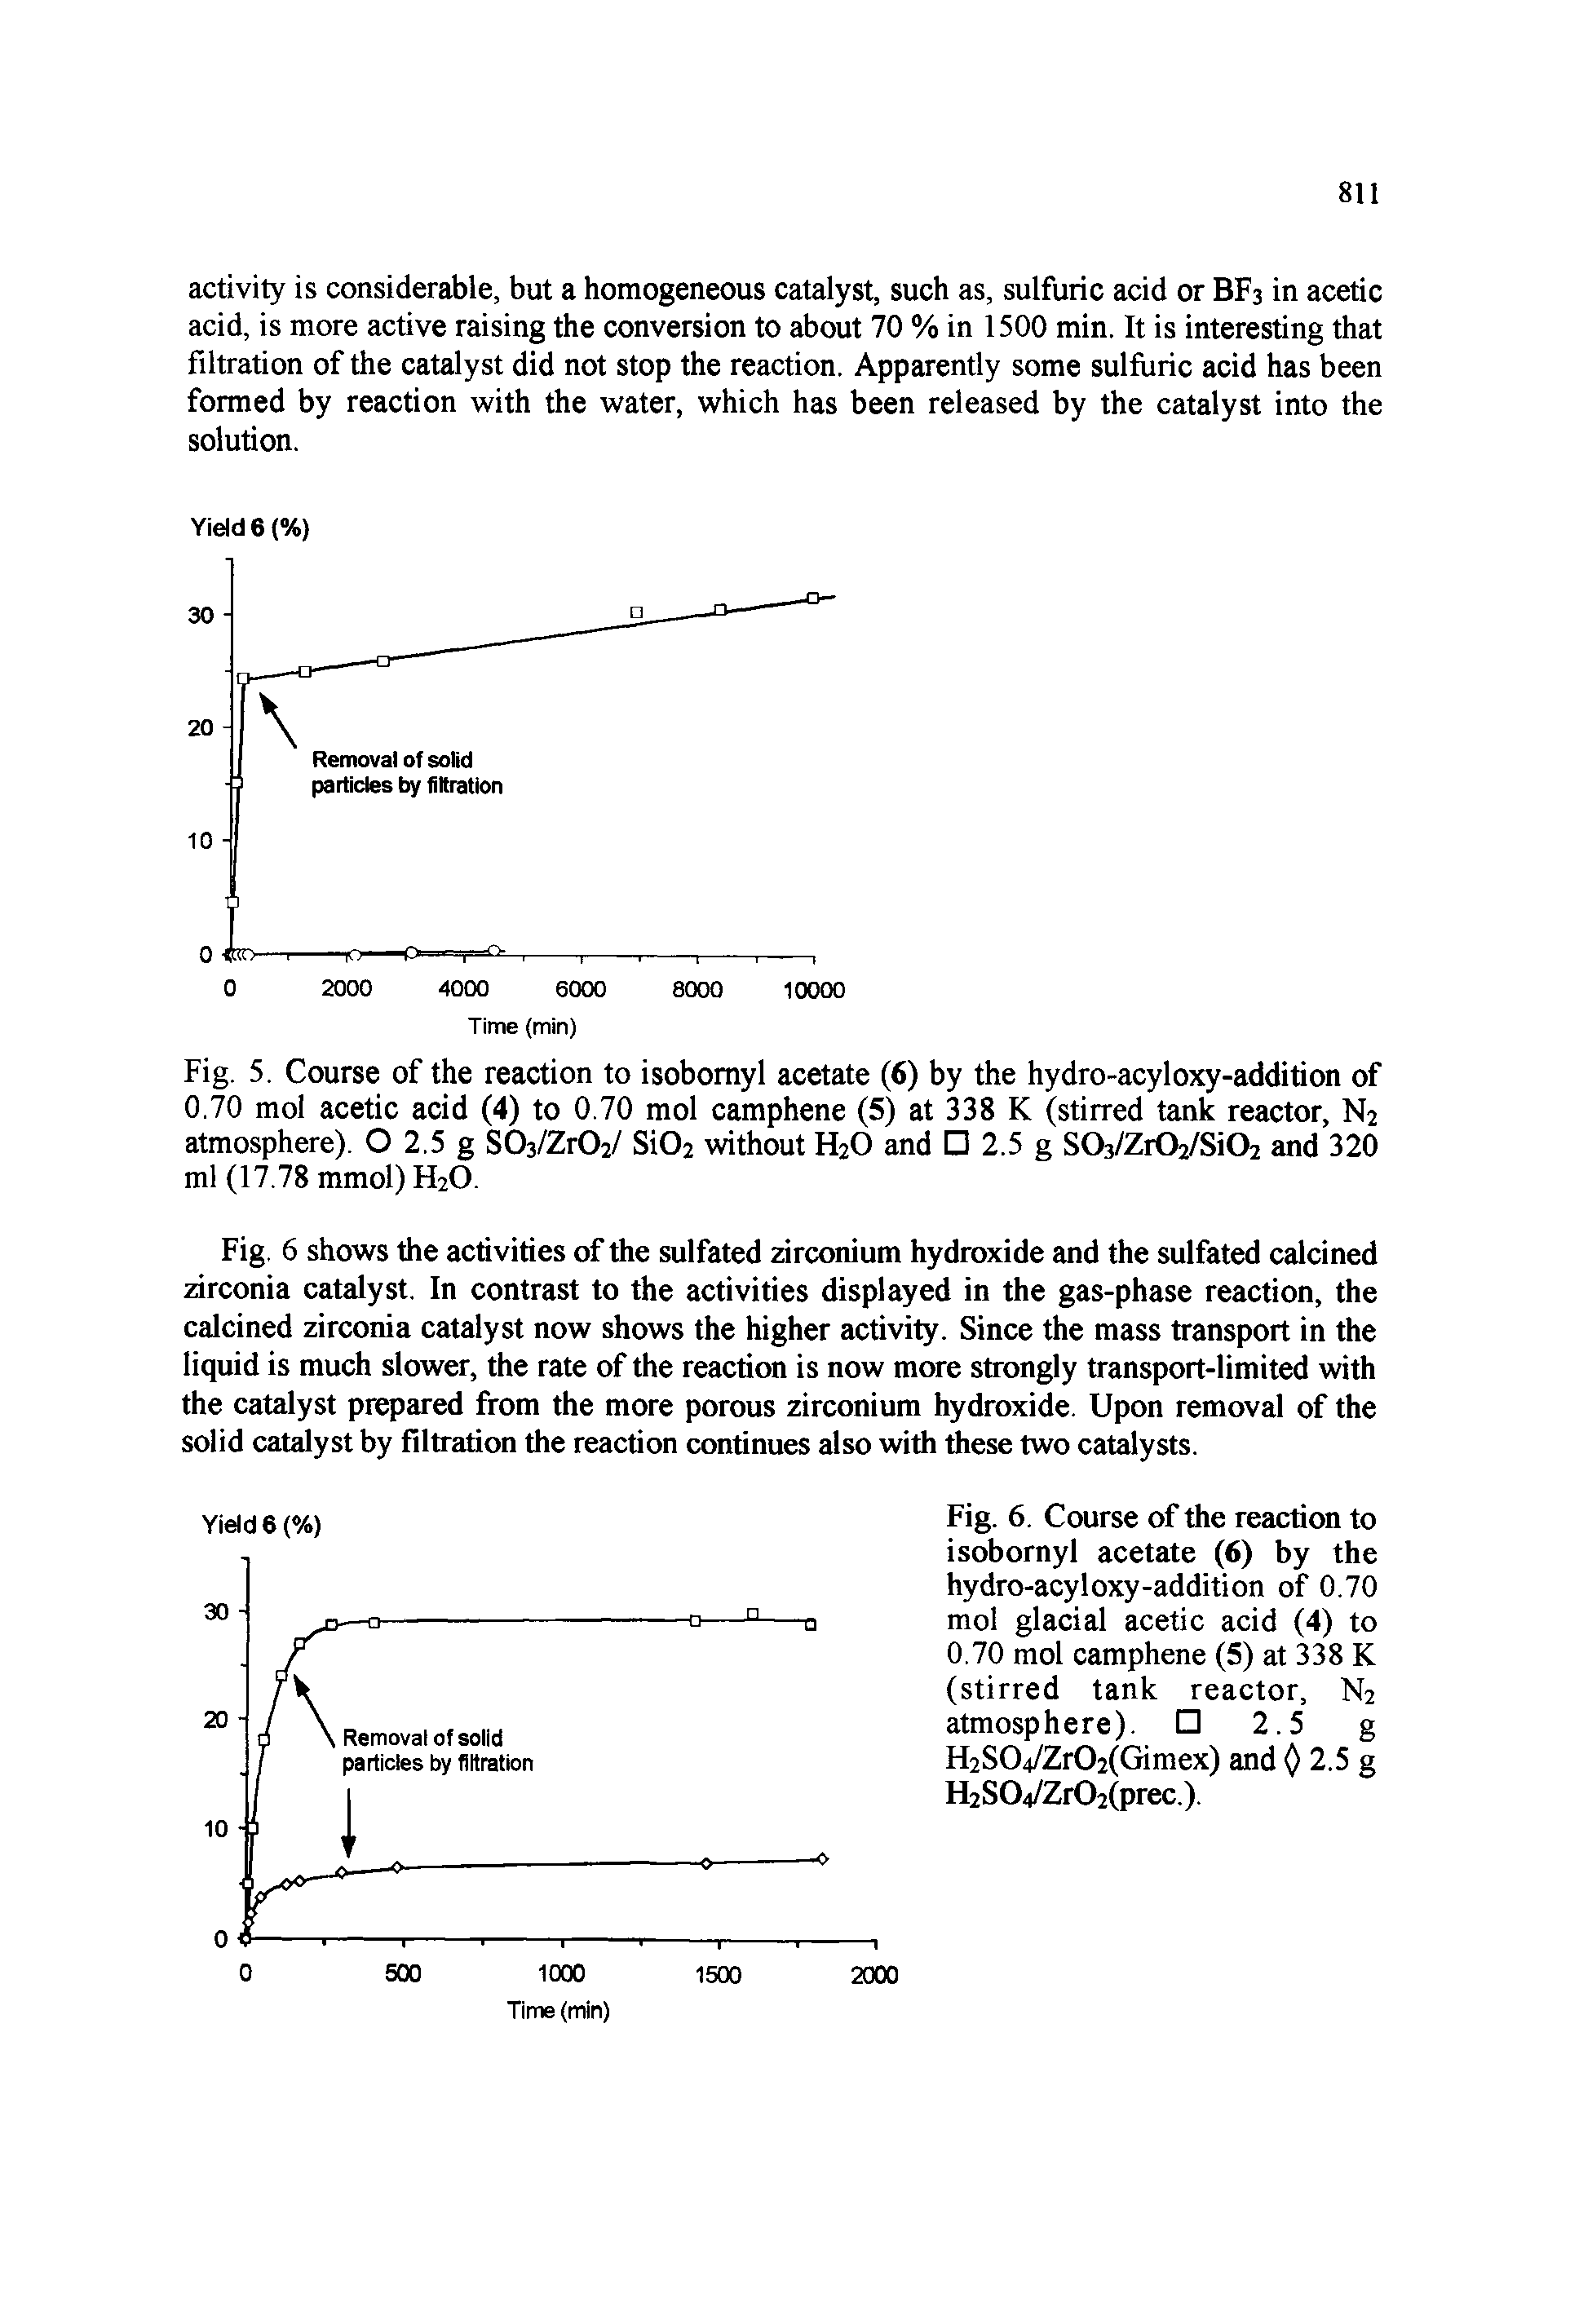 Fig. 5. Course of the reaction to isobomyl acetate (6) by the hydro-acyloxy-addition of 0.70 mol acetic acid (4) to 0.70 mol camphene (5) at 338 K (stirred tank reactor, N2 atmosphere). O 2.5 g %O IZxO ll Si02 without H2O and 2.5 g S03/Zr02/Si02 and 320 ml (17.78 mmol) H2O.